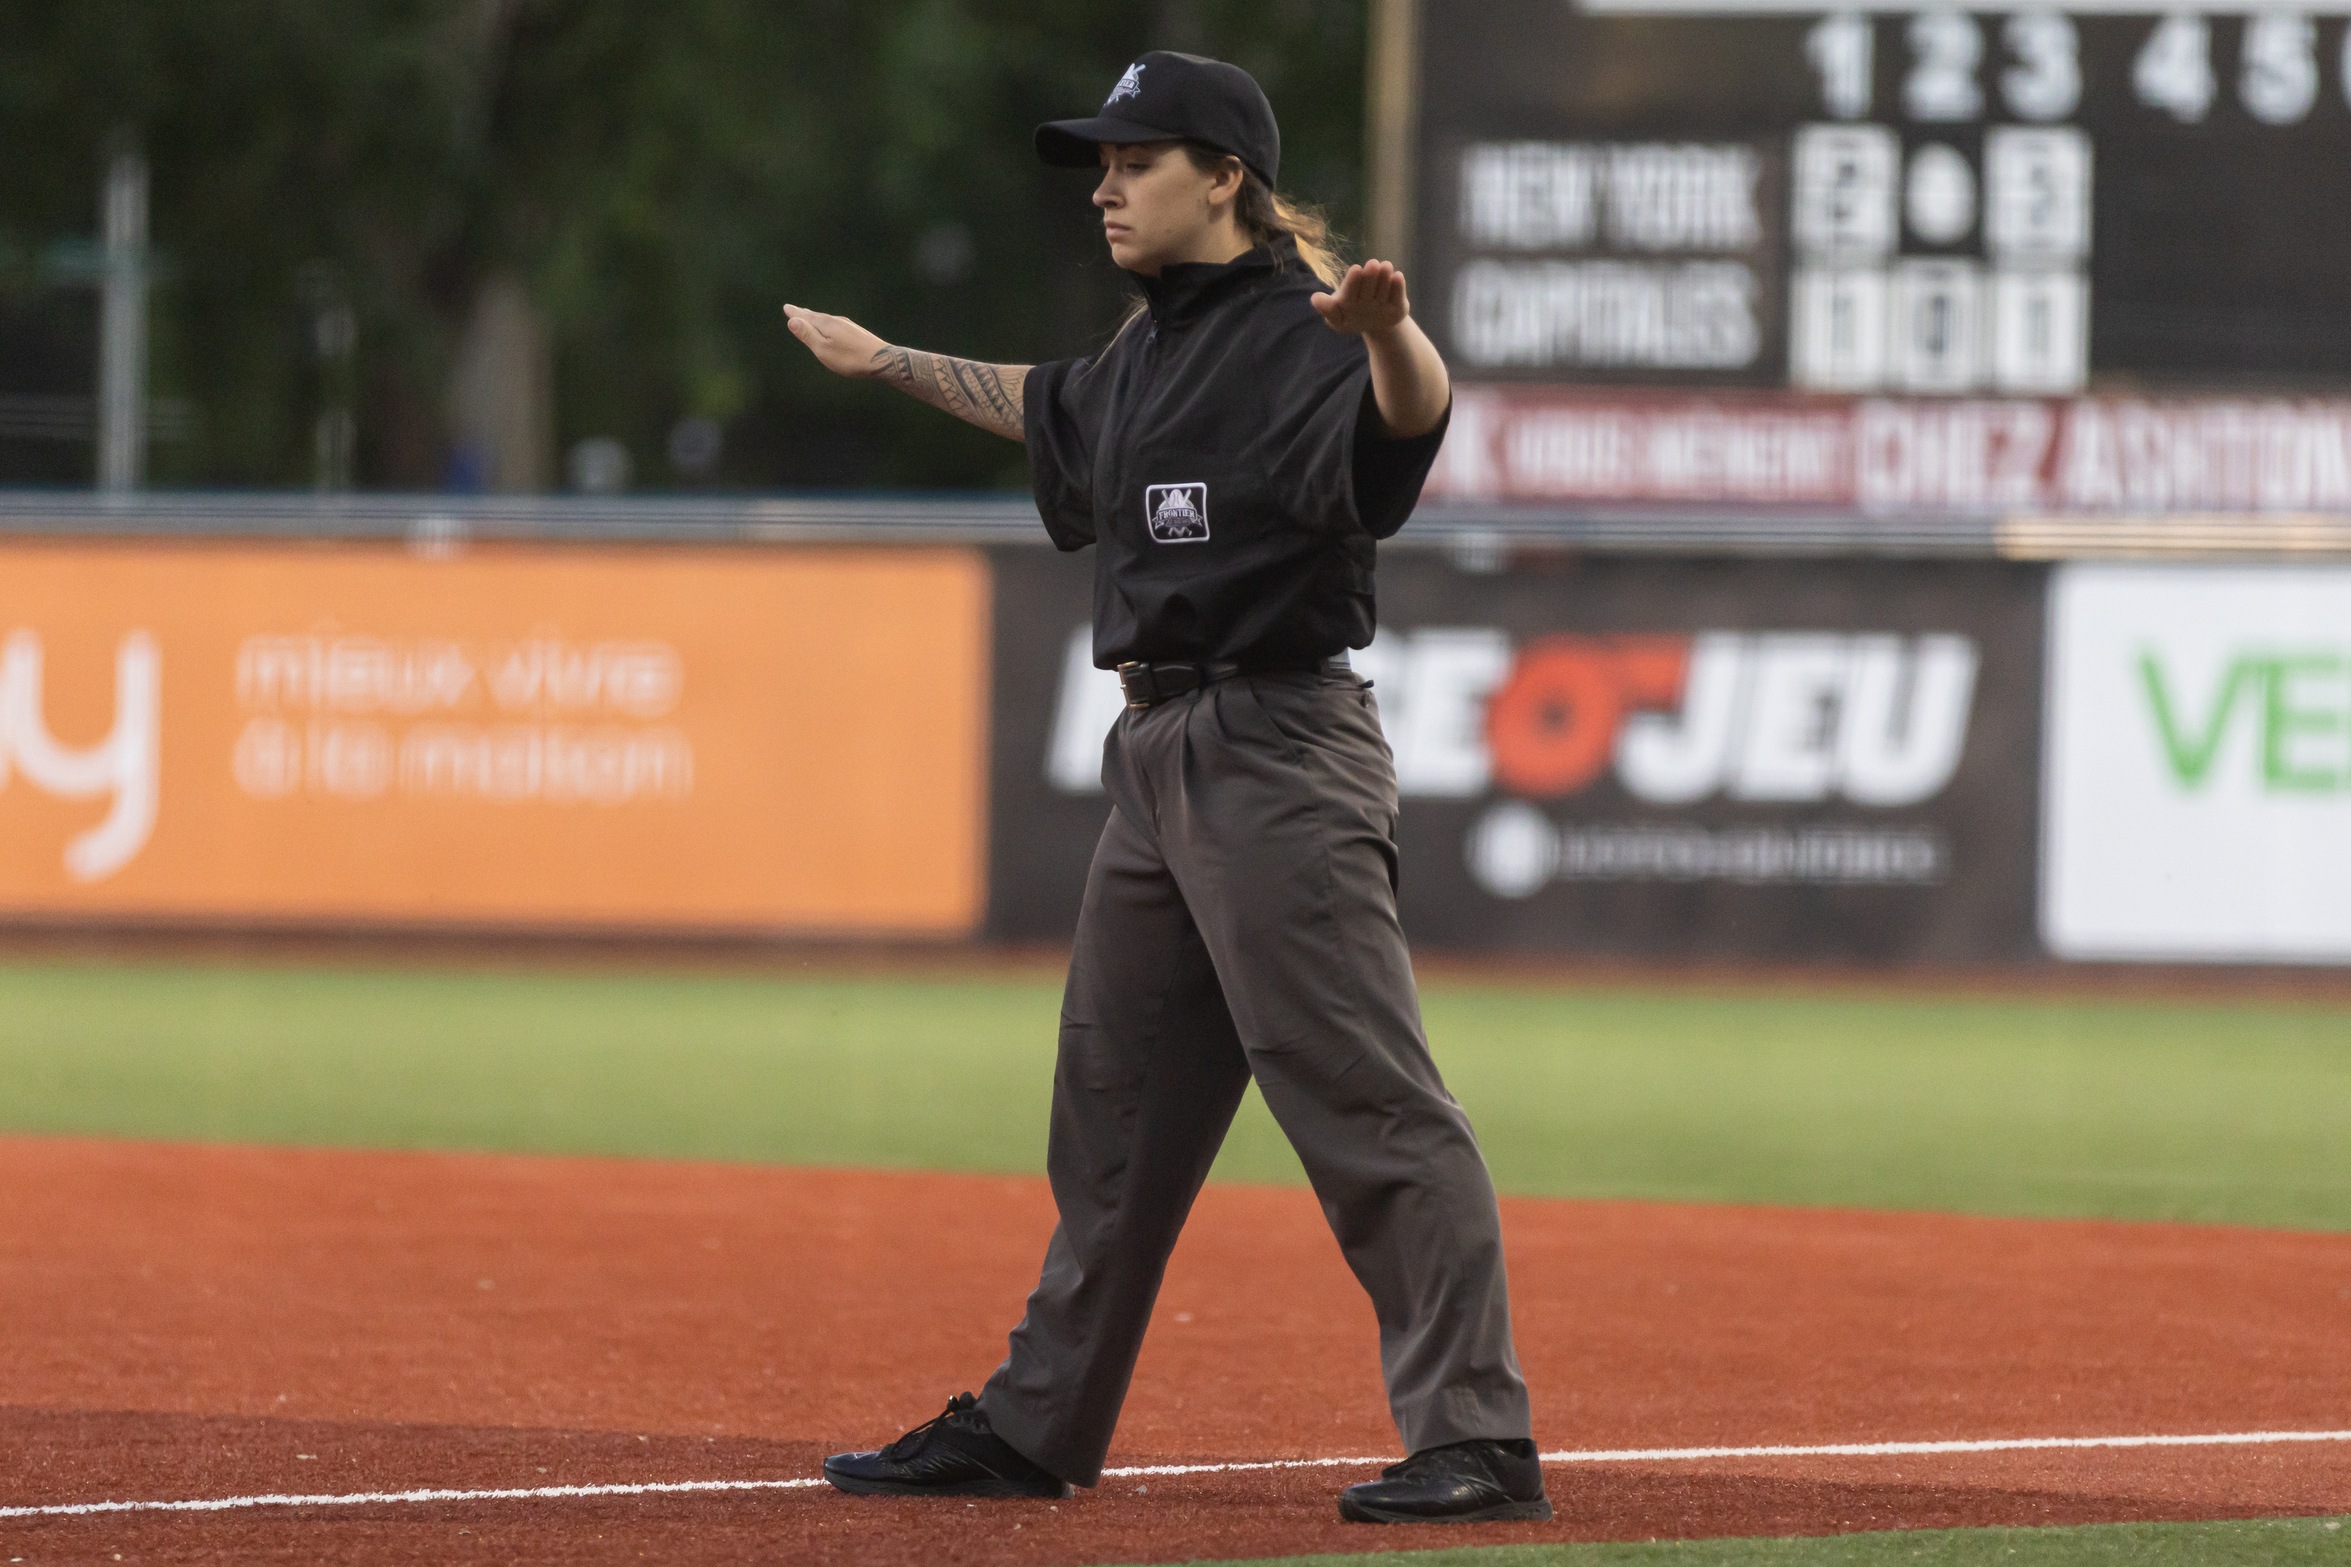 TANYA MILLETTE BECOMES SECOND FEMALE FRONTIER LEAGUE UMPIRE